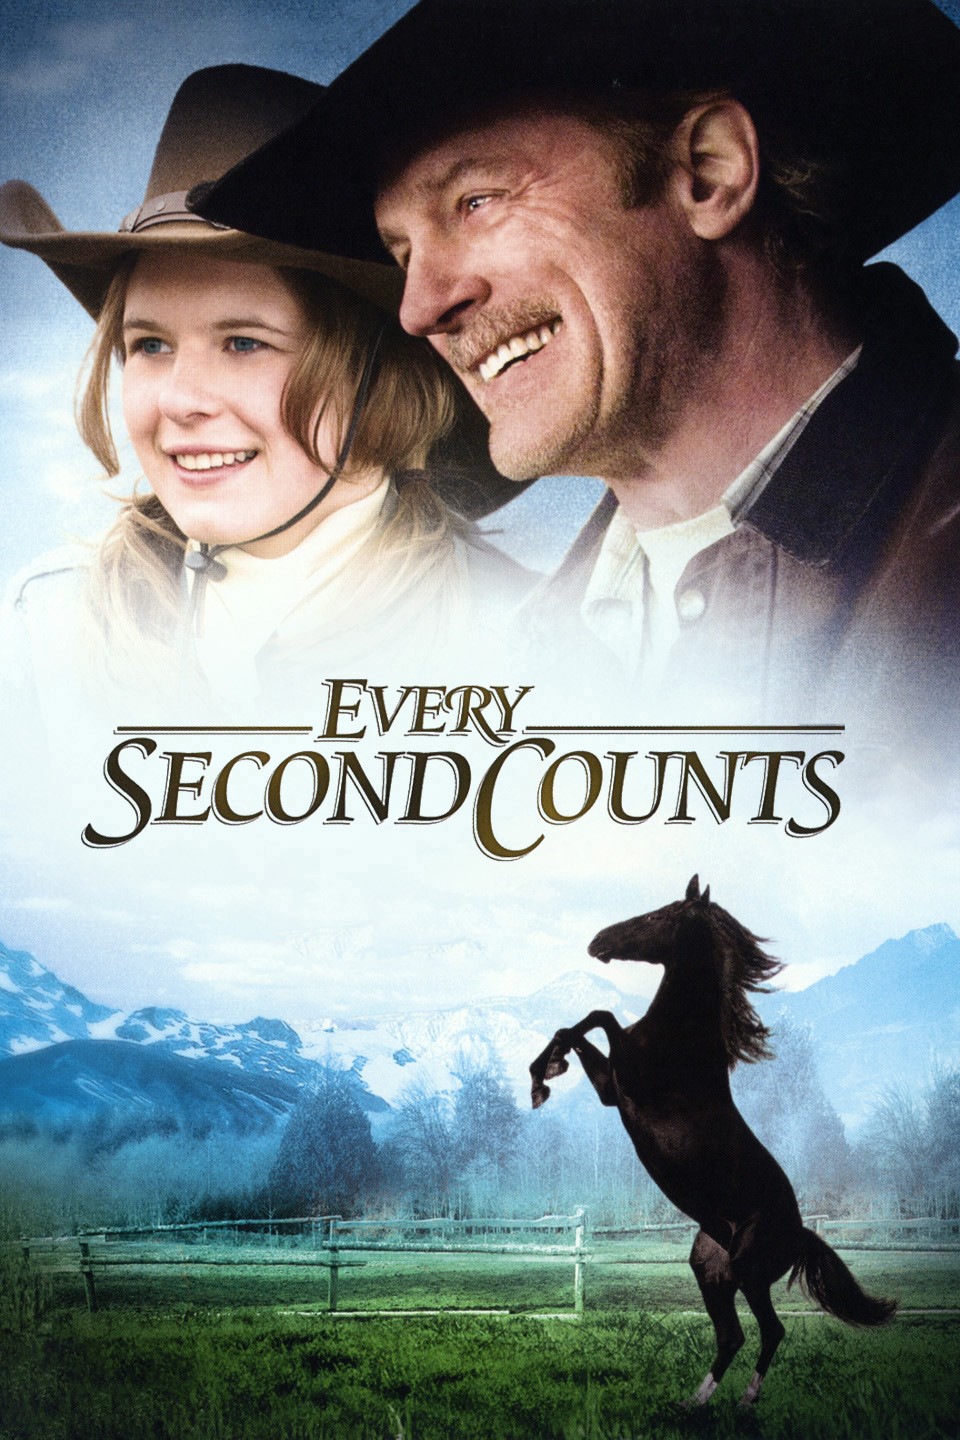 Second count